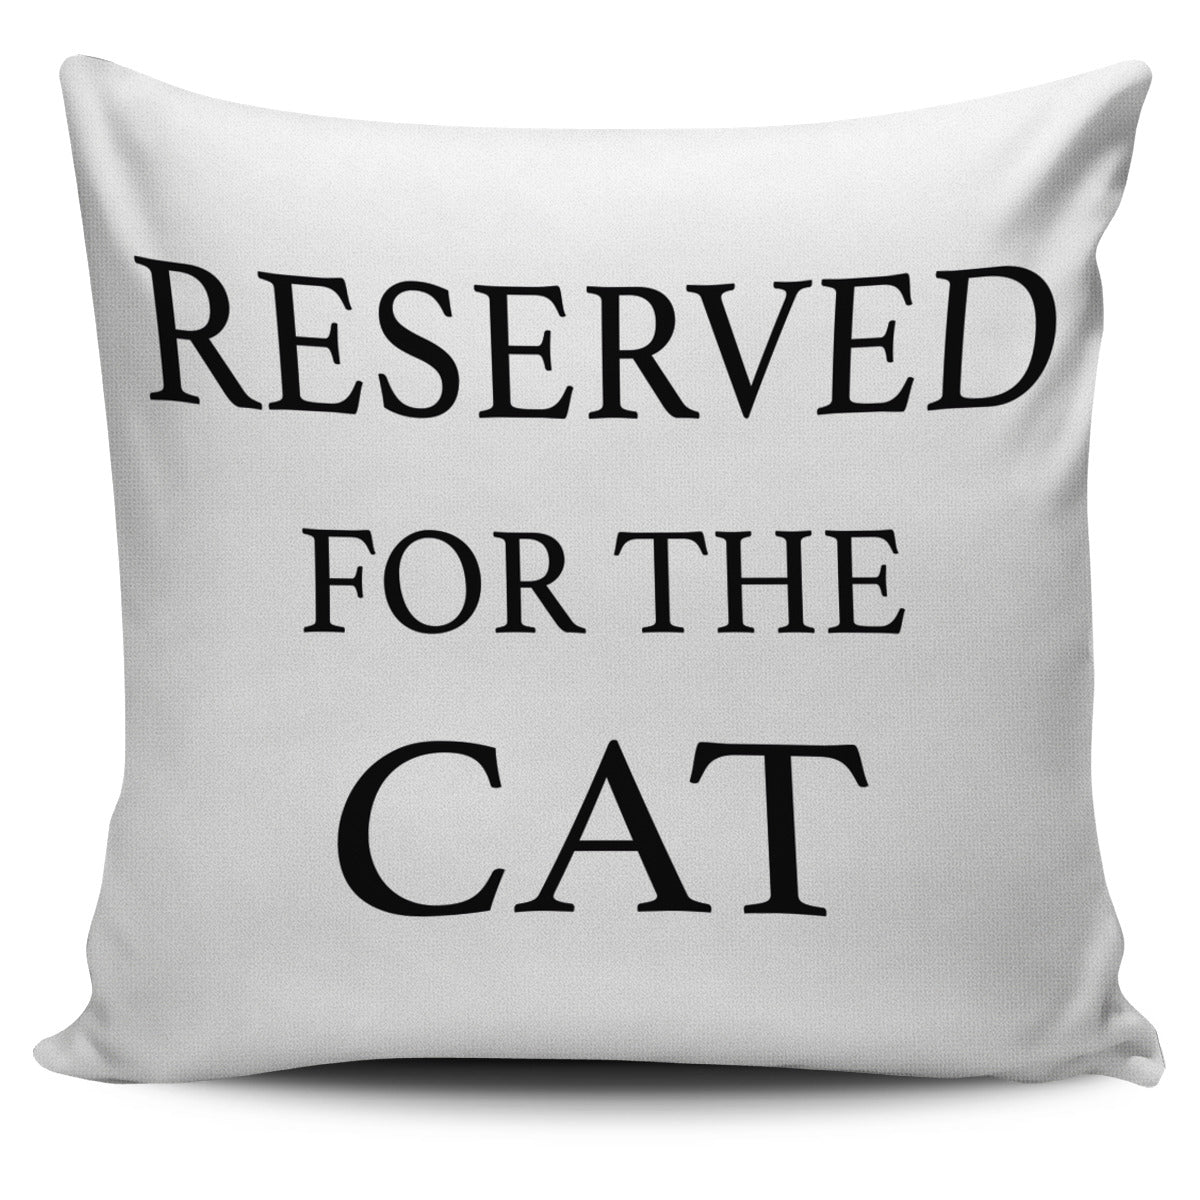 Reserved For The Cat Pillow Cover